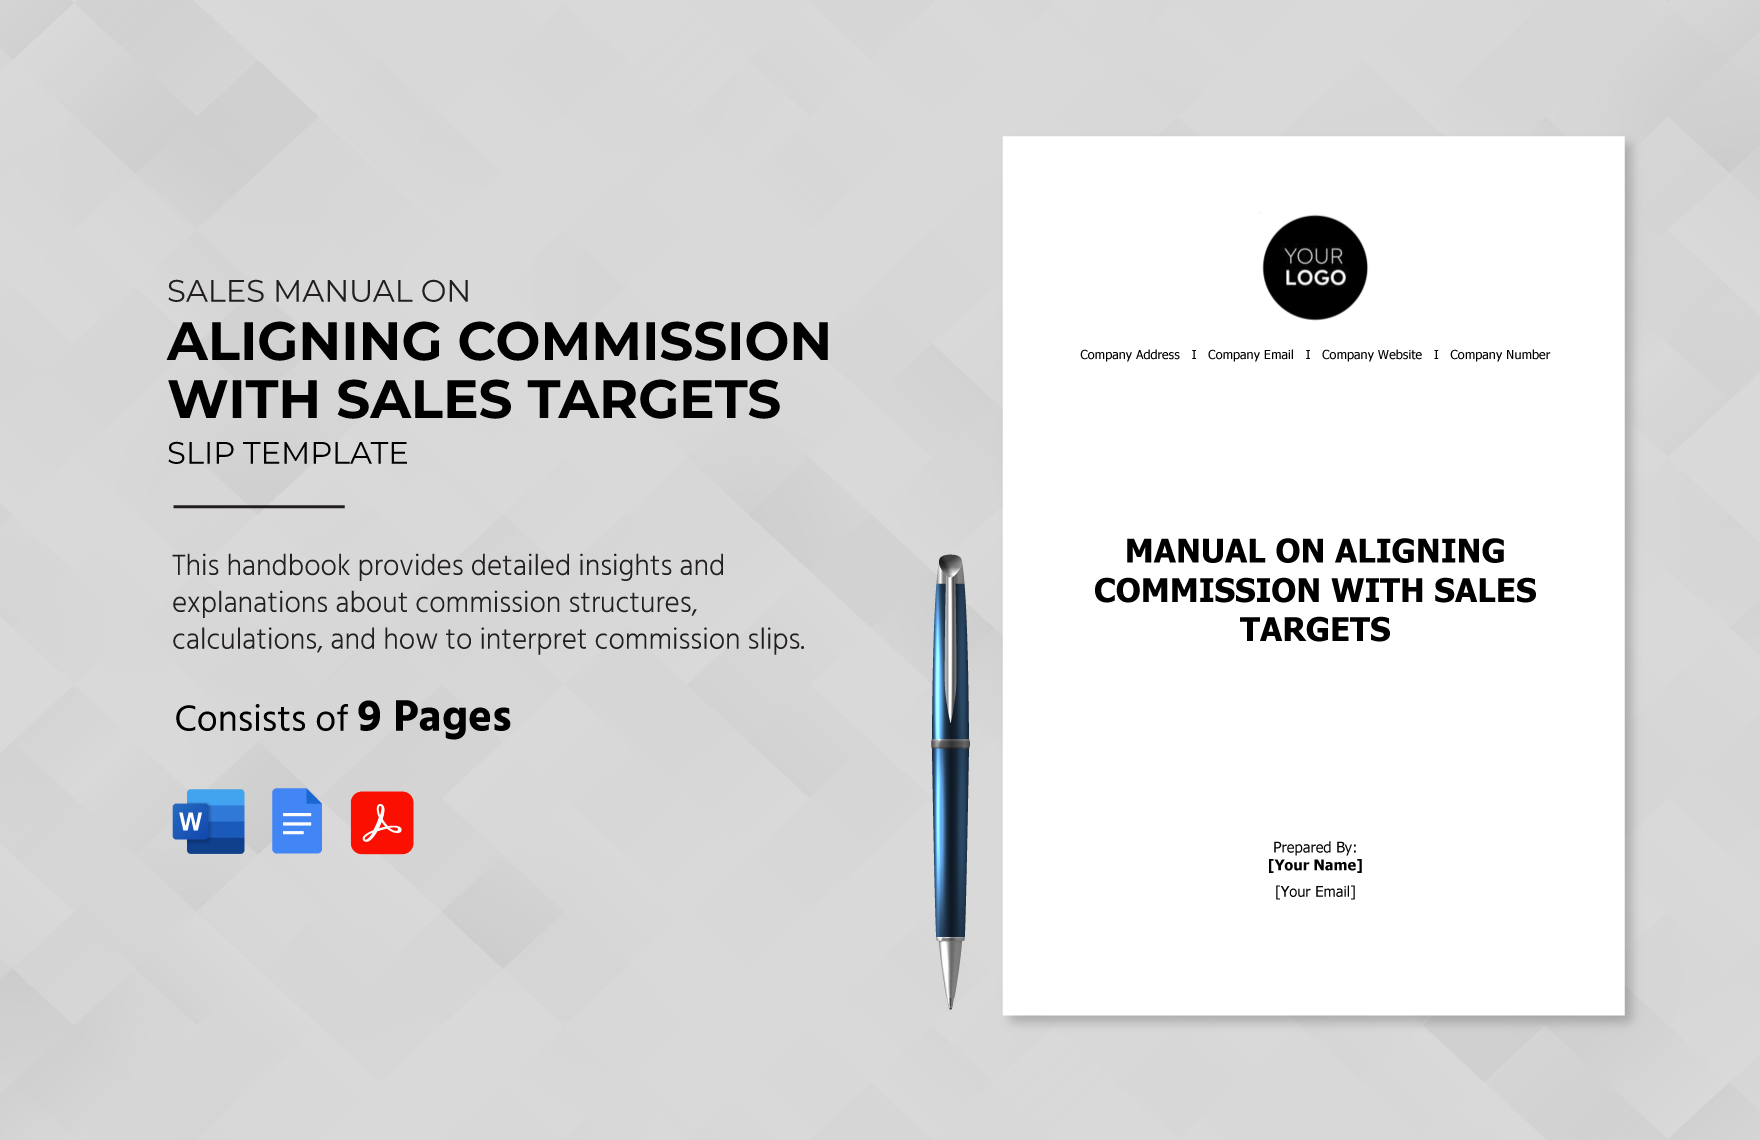 Manual on Aligning Commission with Sales Targets Template in Word, Google Docs, PDF